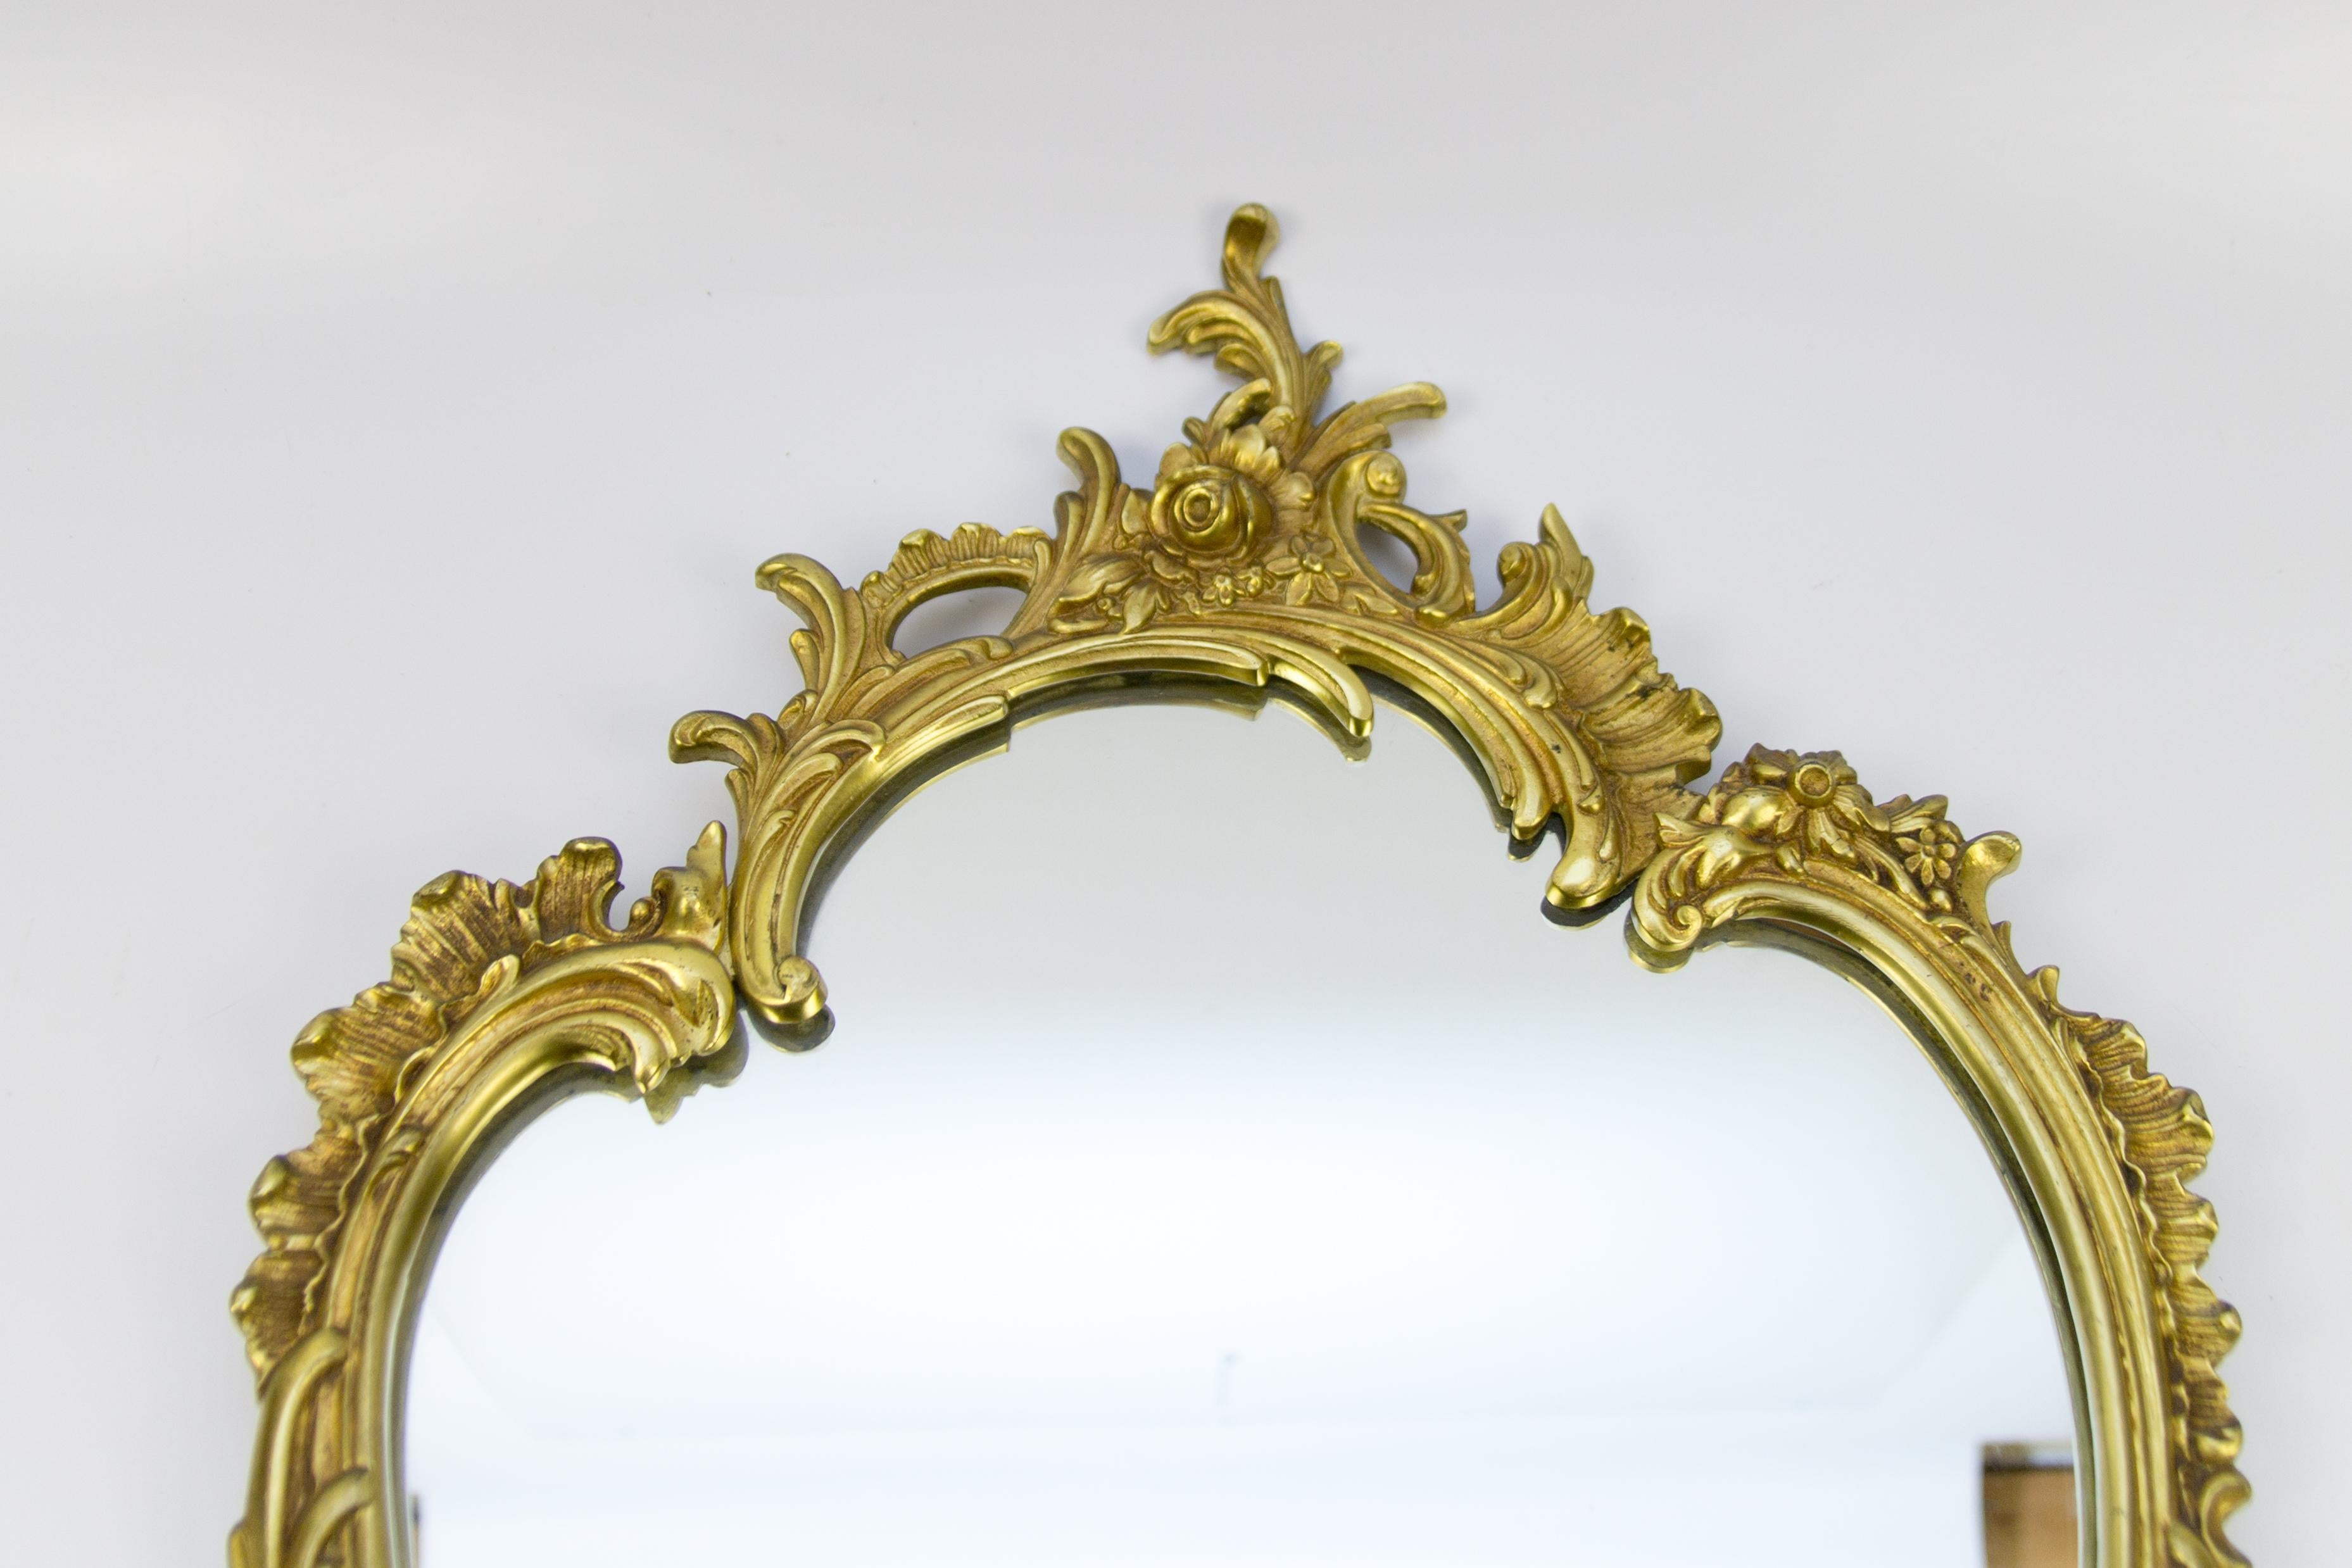 Beautiful oval shaped French Rococo style or Louis XV style wall mirror in bronze, decorated with C-scrolls, rocaille and floral motifs, circa 1950s.
Dimensions: Height 70 cm / 27.55 in, width 42 cm / 16.53 in depth, 2 cm / 0.78 in.